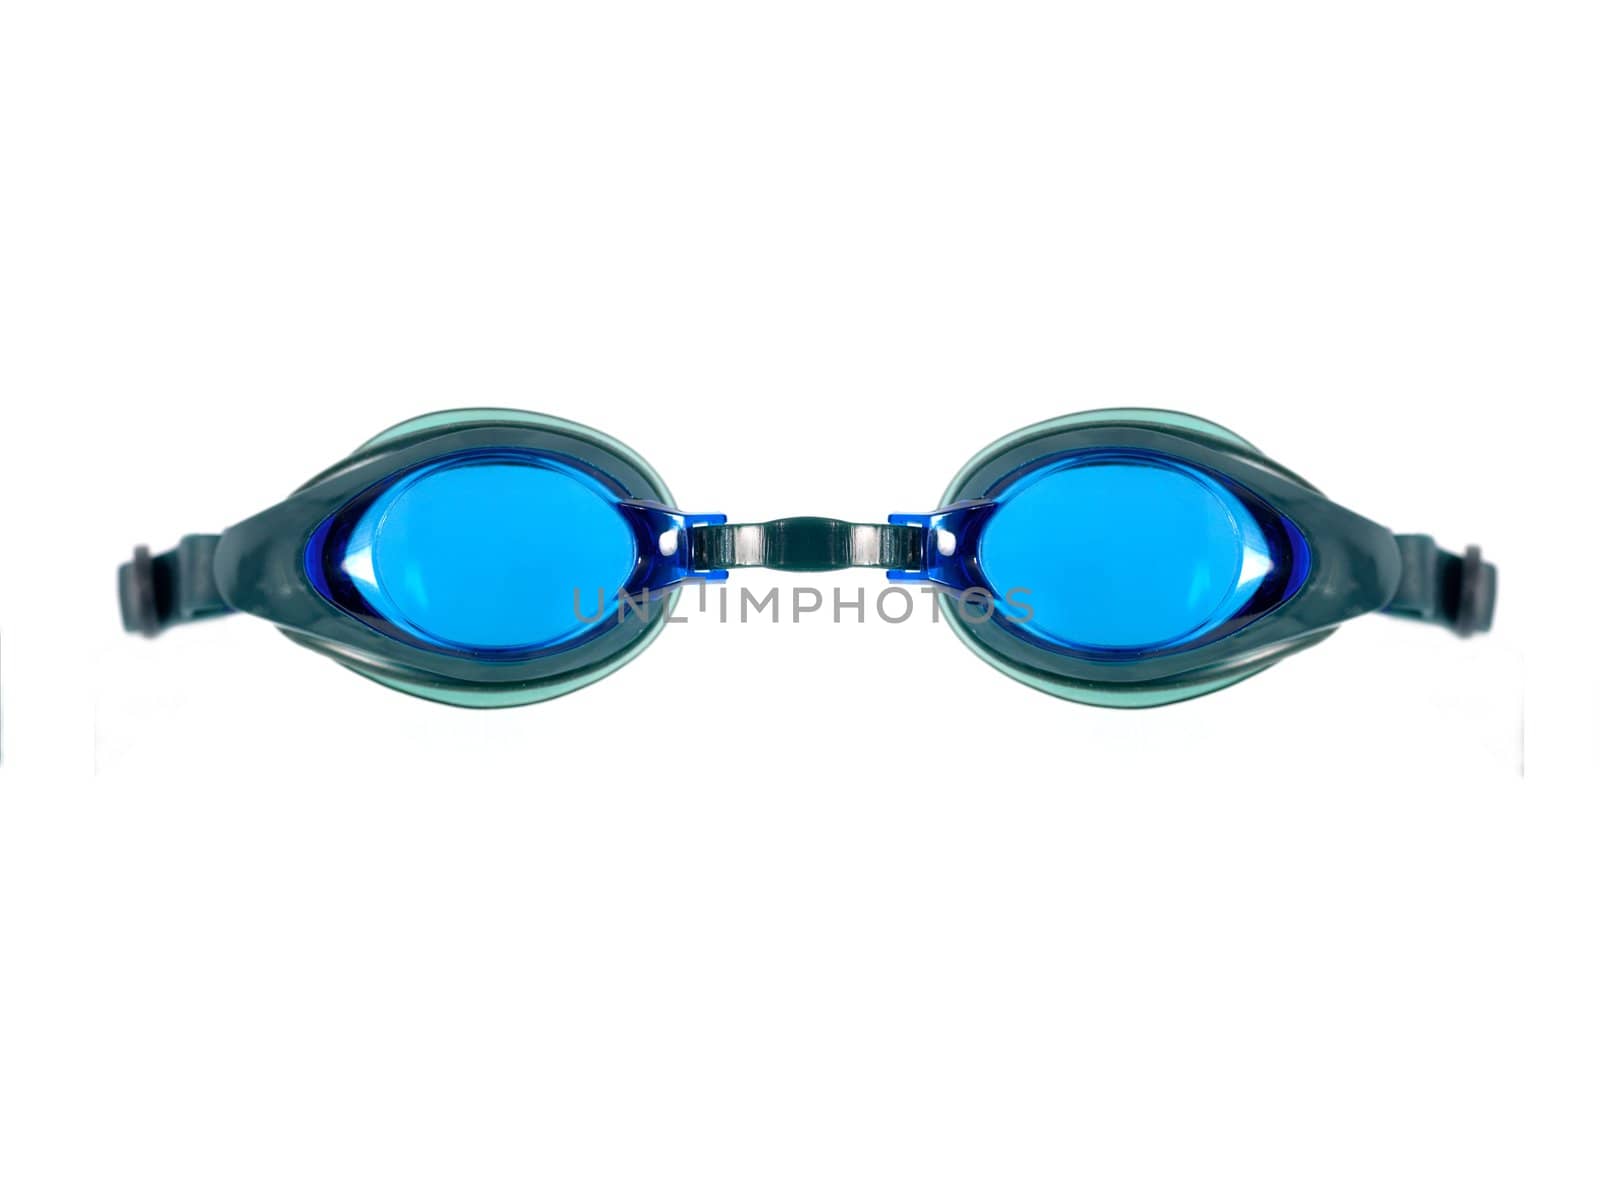 Swimming goggles isolated against a white background